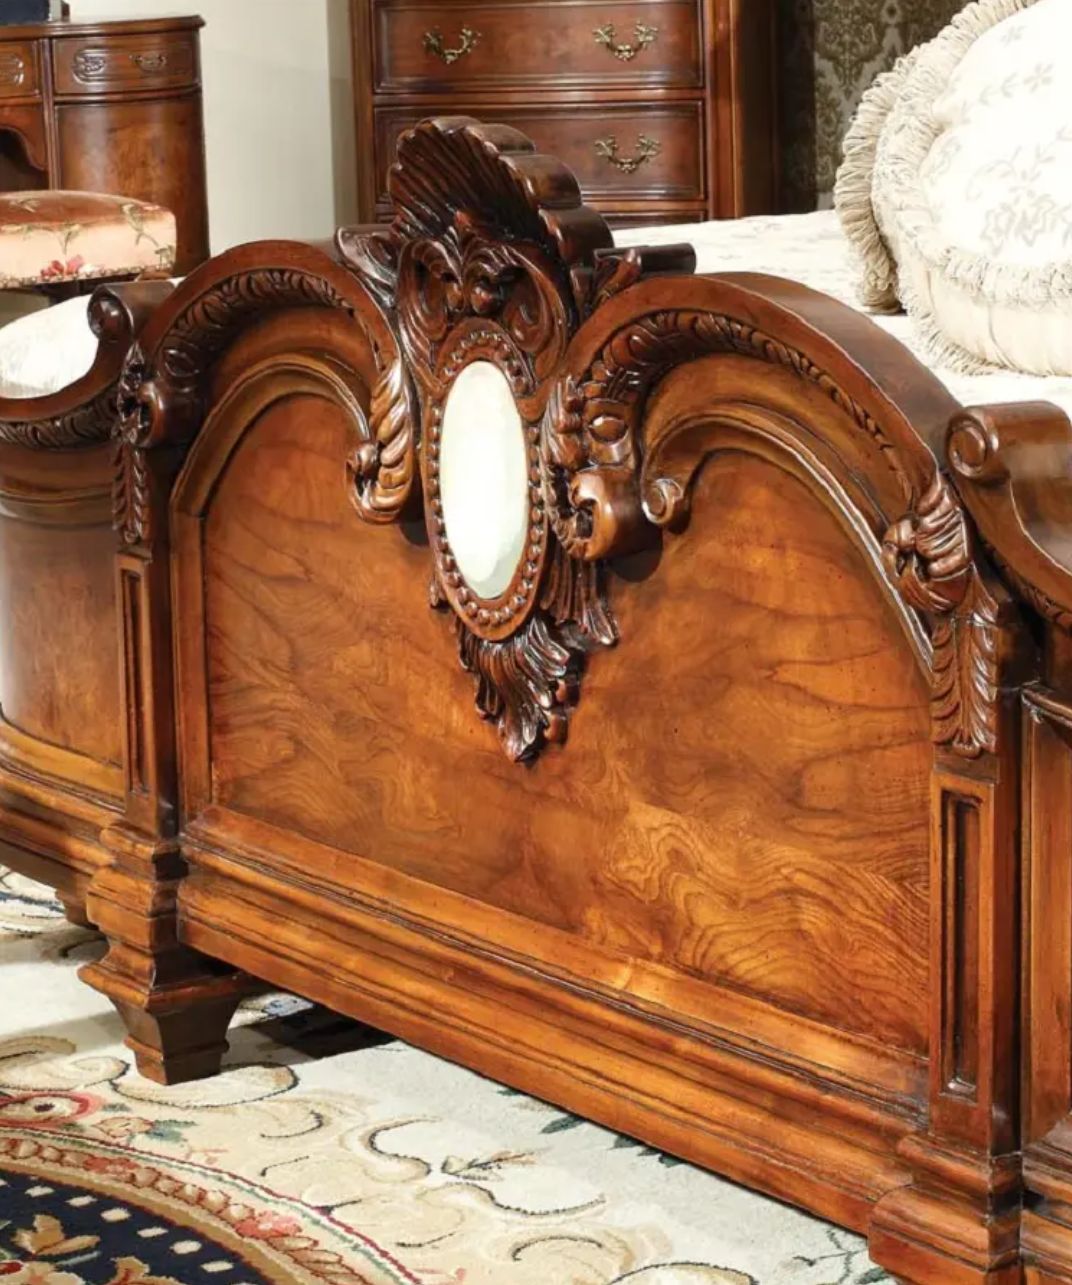 Gorgeous solid wood French styled king sized bed